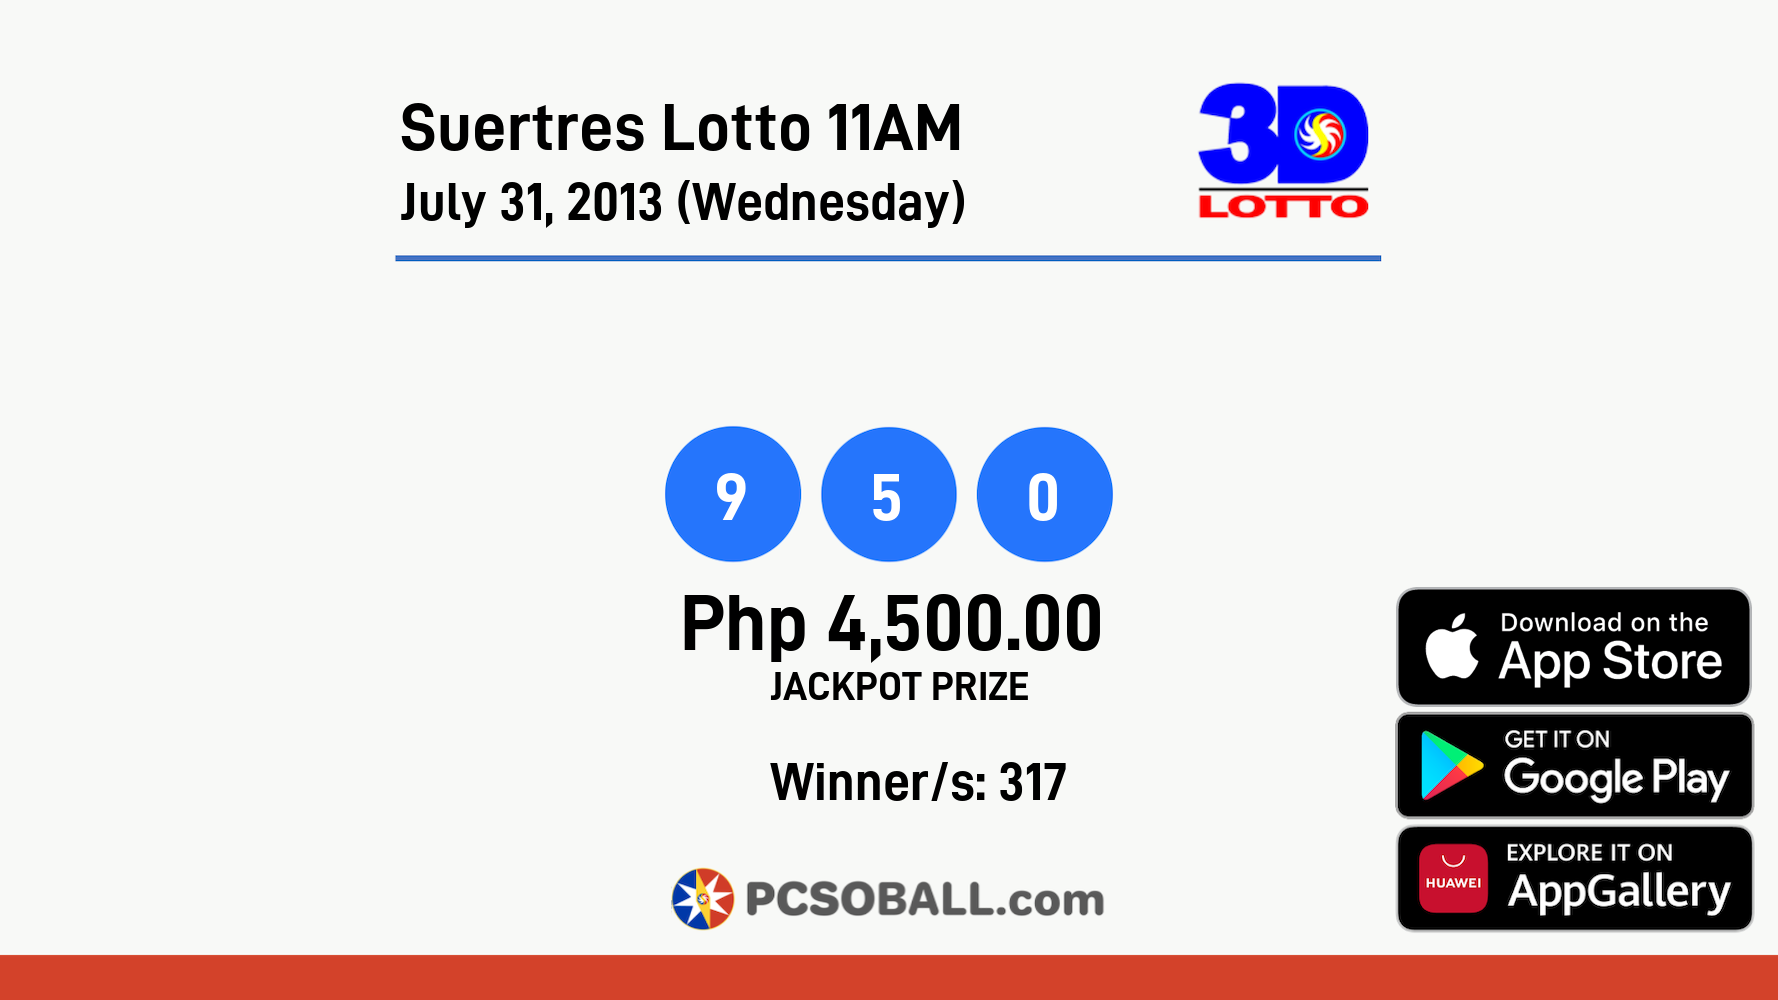 Suertres Lotto 11AM July 31, 2013 (Wednesday) Result